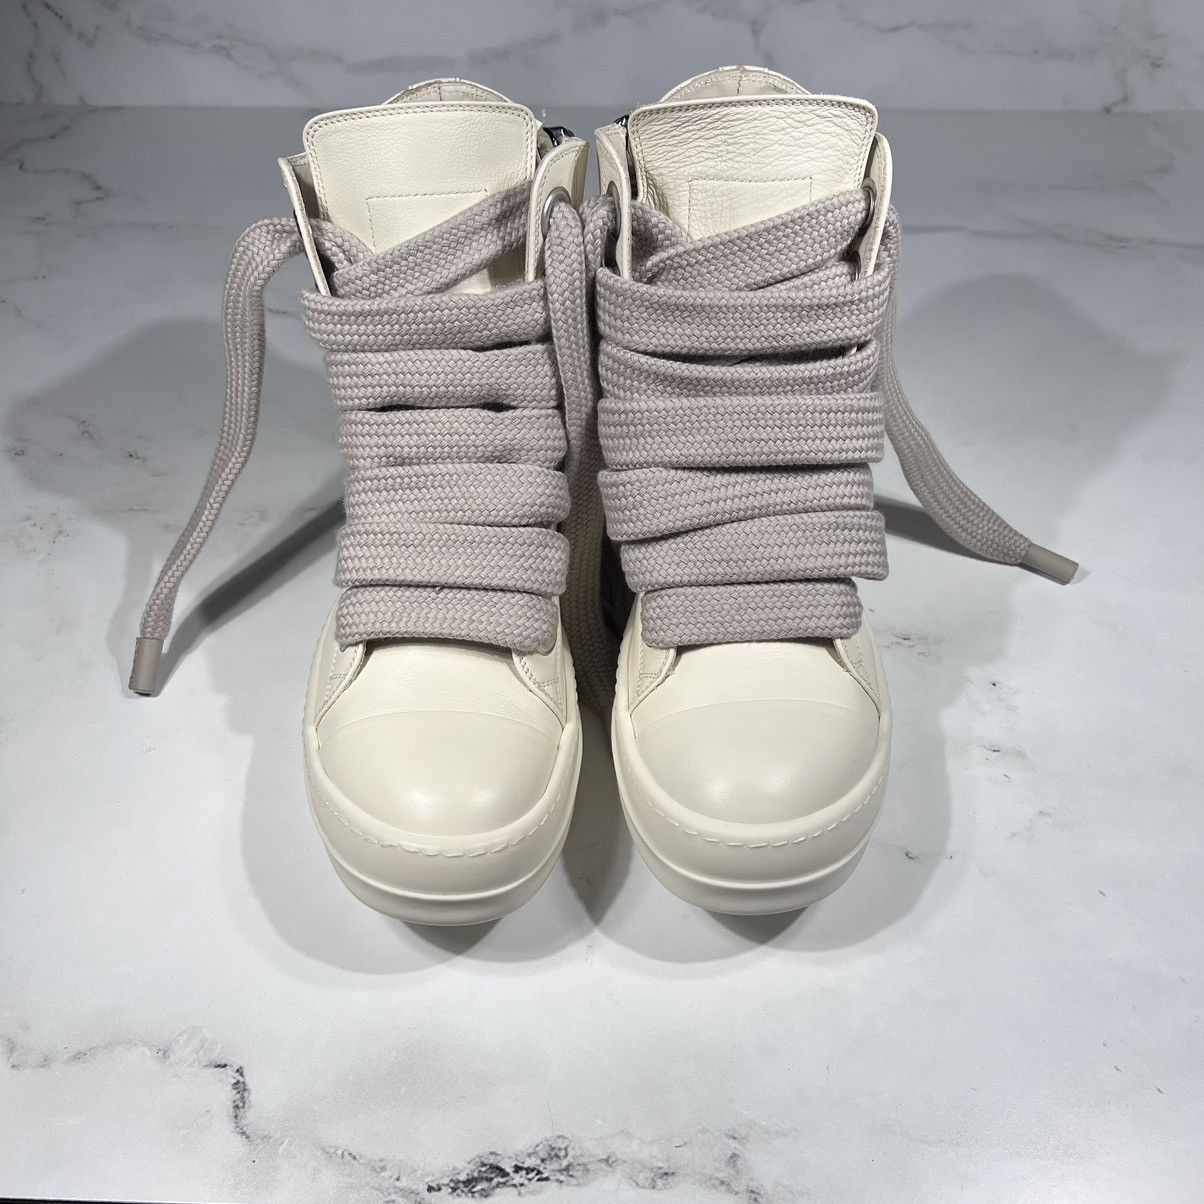 Rick Owens Rick Owens Ramones Milk Leather Thick Lace High Top Sneakers Size US 7 / IT 37 - 7 Thumbnail